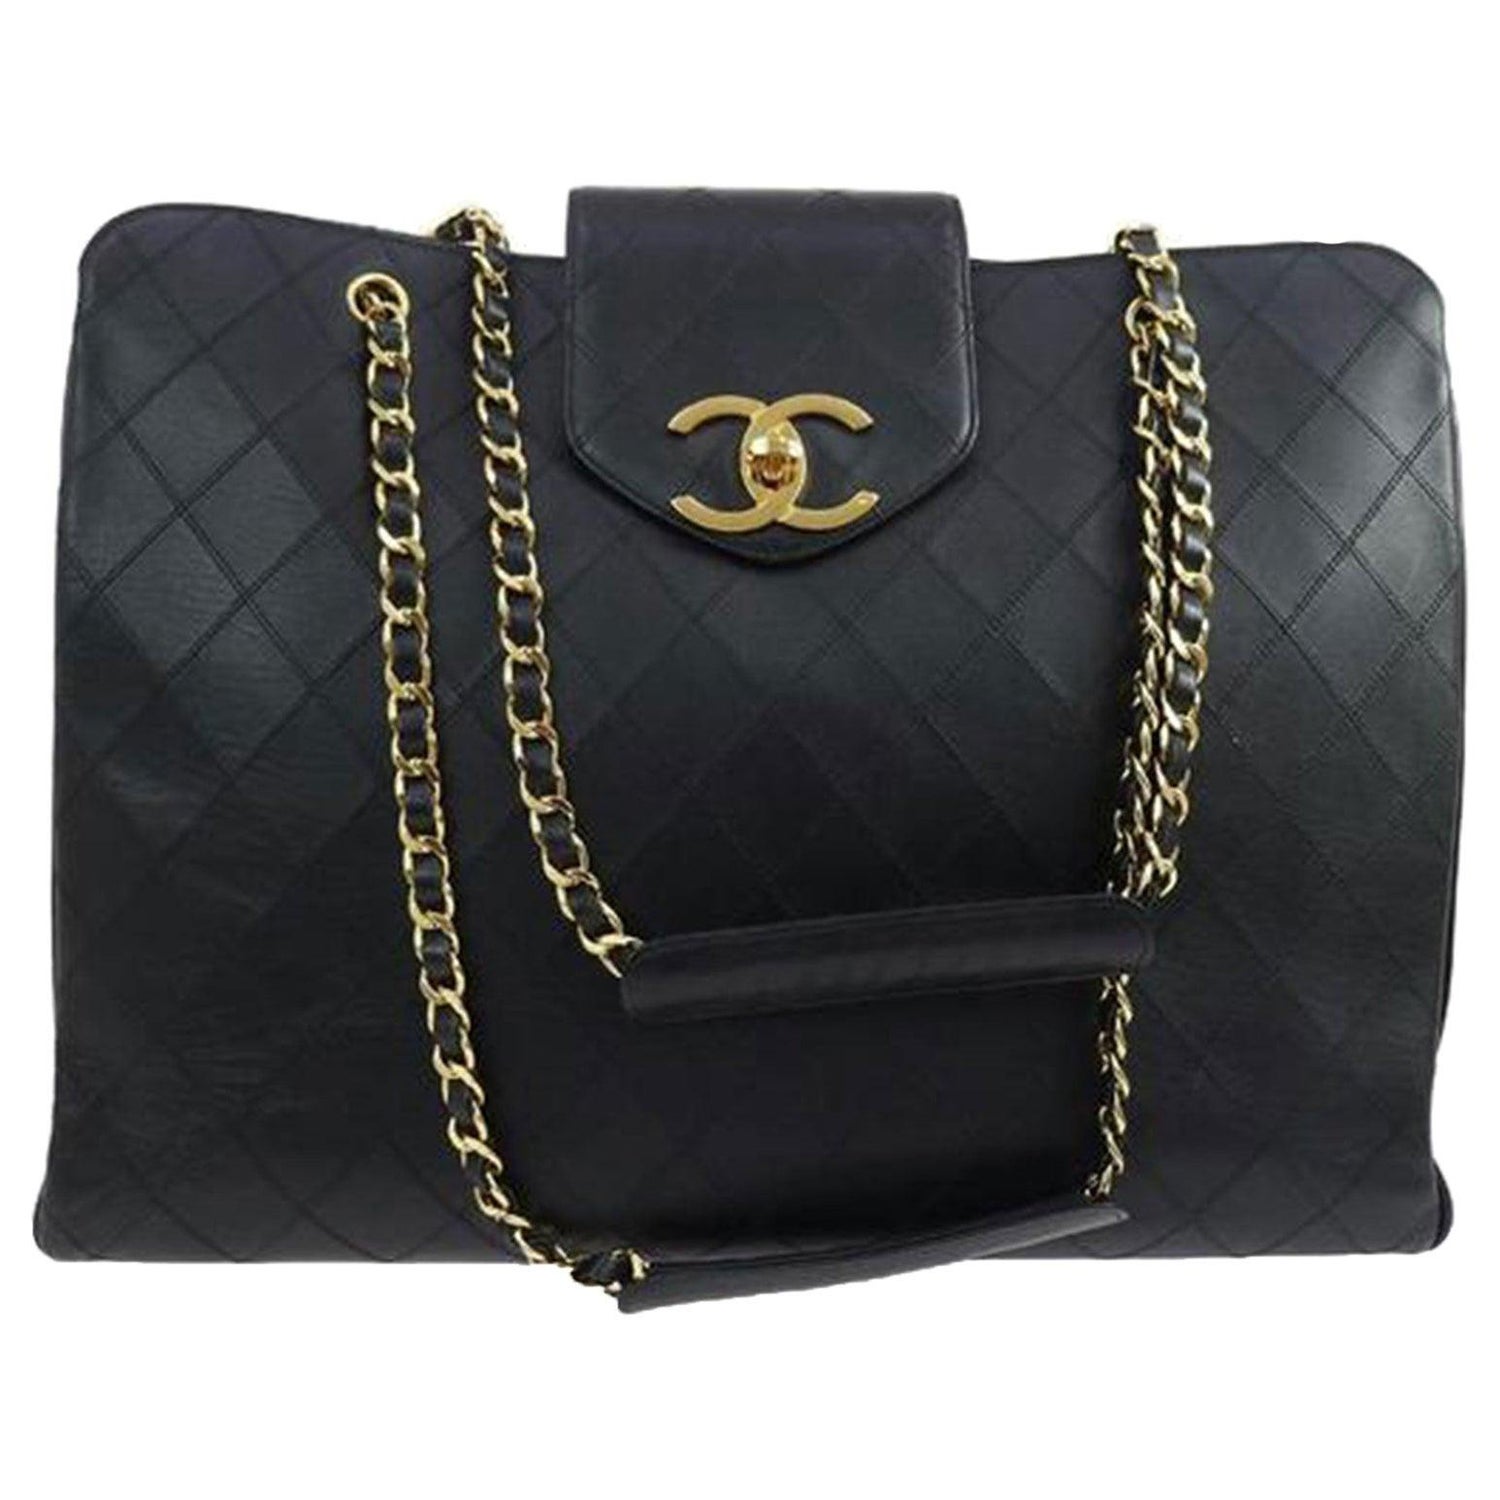 Chanel Classic Flap Travel Airline Airport 2016 Runway Top Handle